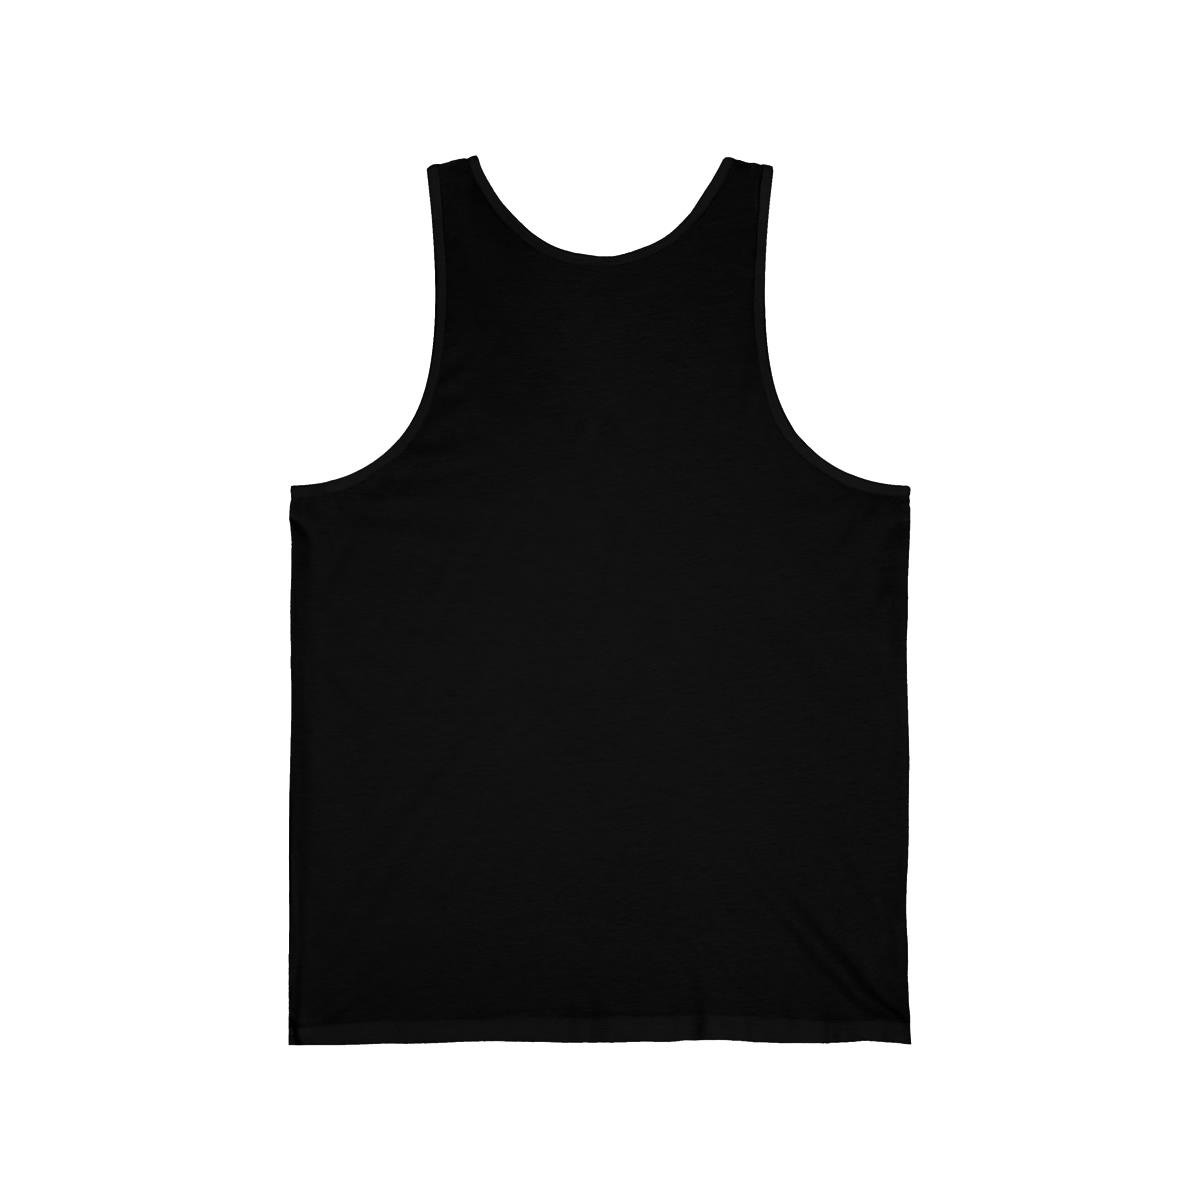 Riveting Truth Unisex Jersey Tank Top